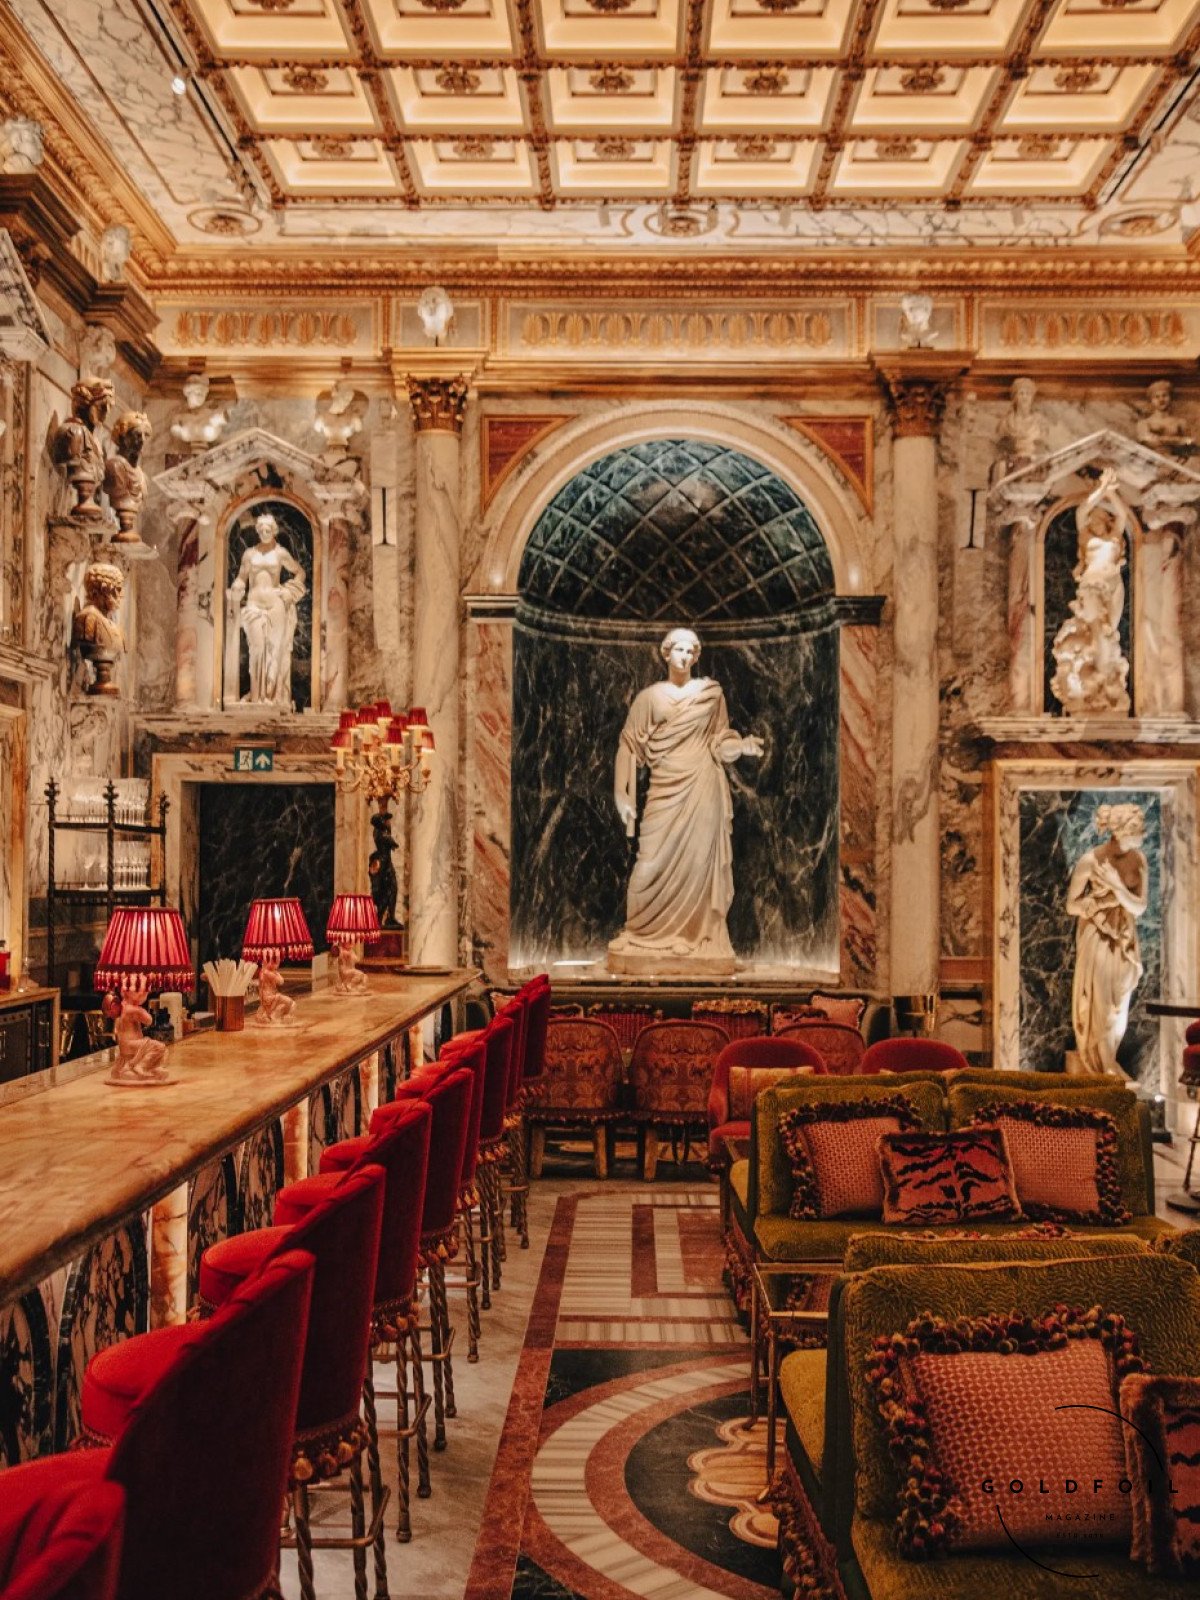 Apollo's muse is an exclusive members' club in London a part of Bacchanalia restaurant in Mayfair